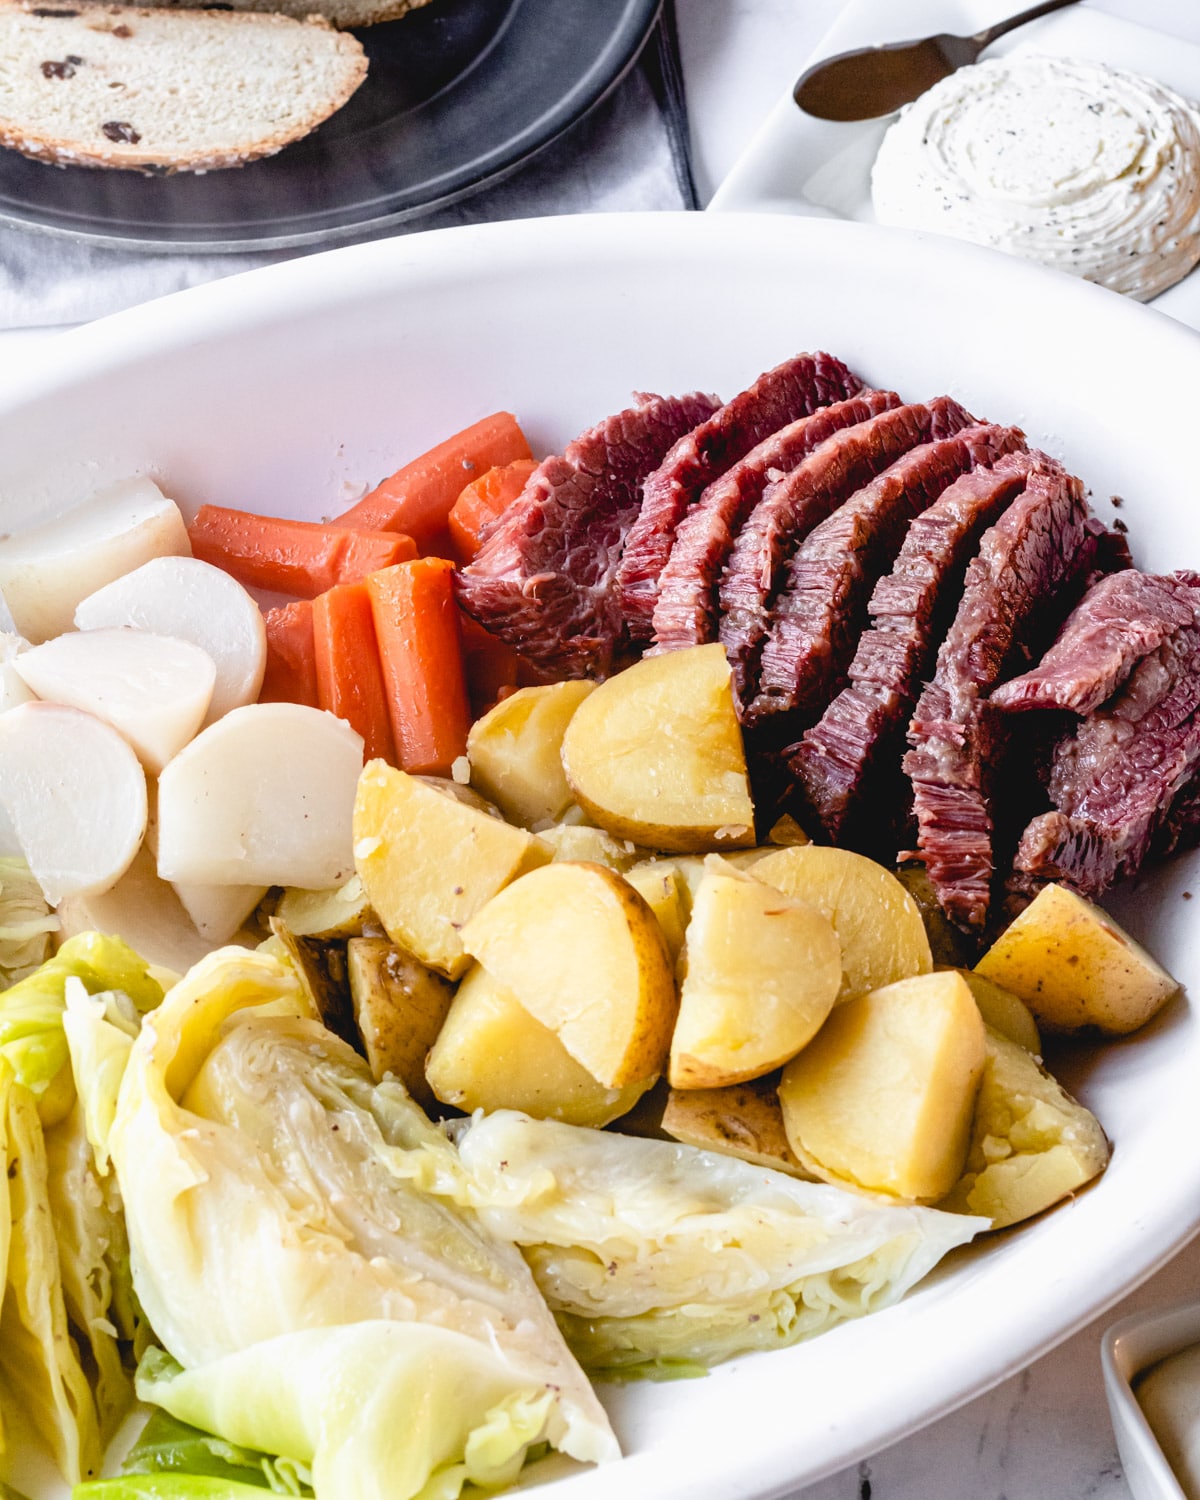 Corned beef on a platter with boiled cabbage, carrots, potatoes, and turnips, with butter and Irish soda bread in background.